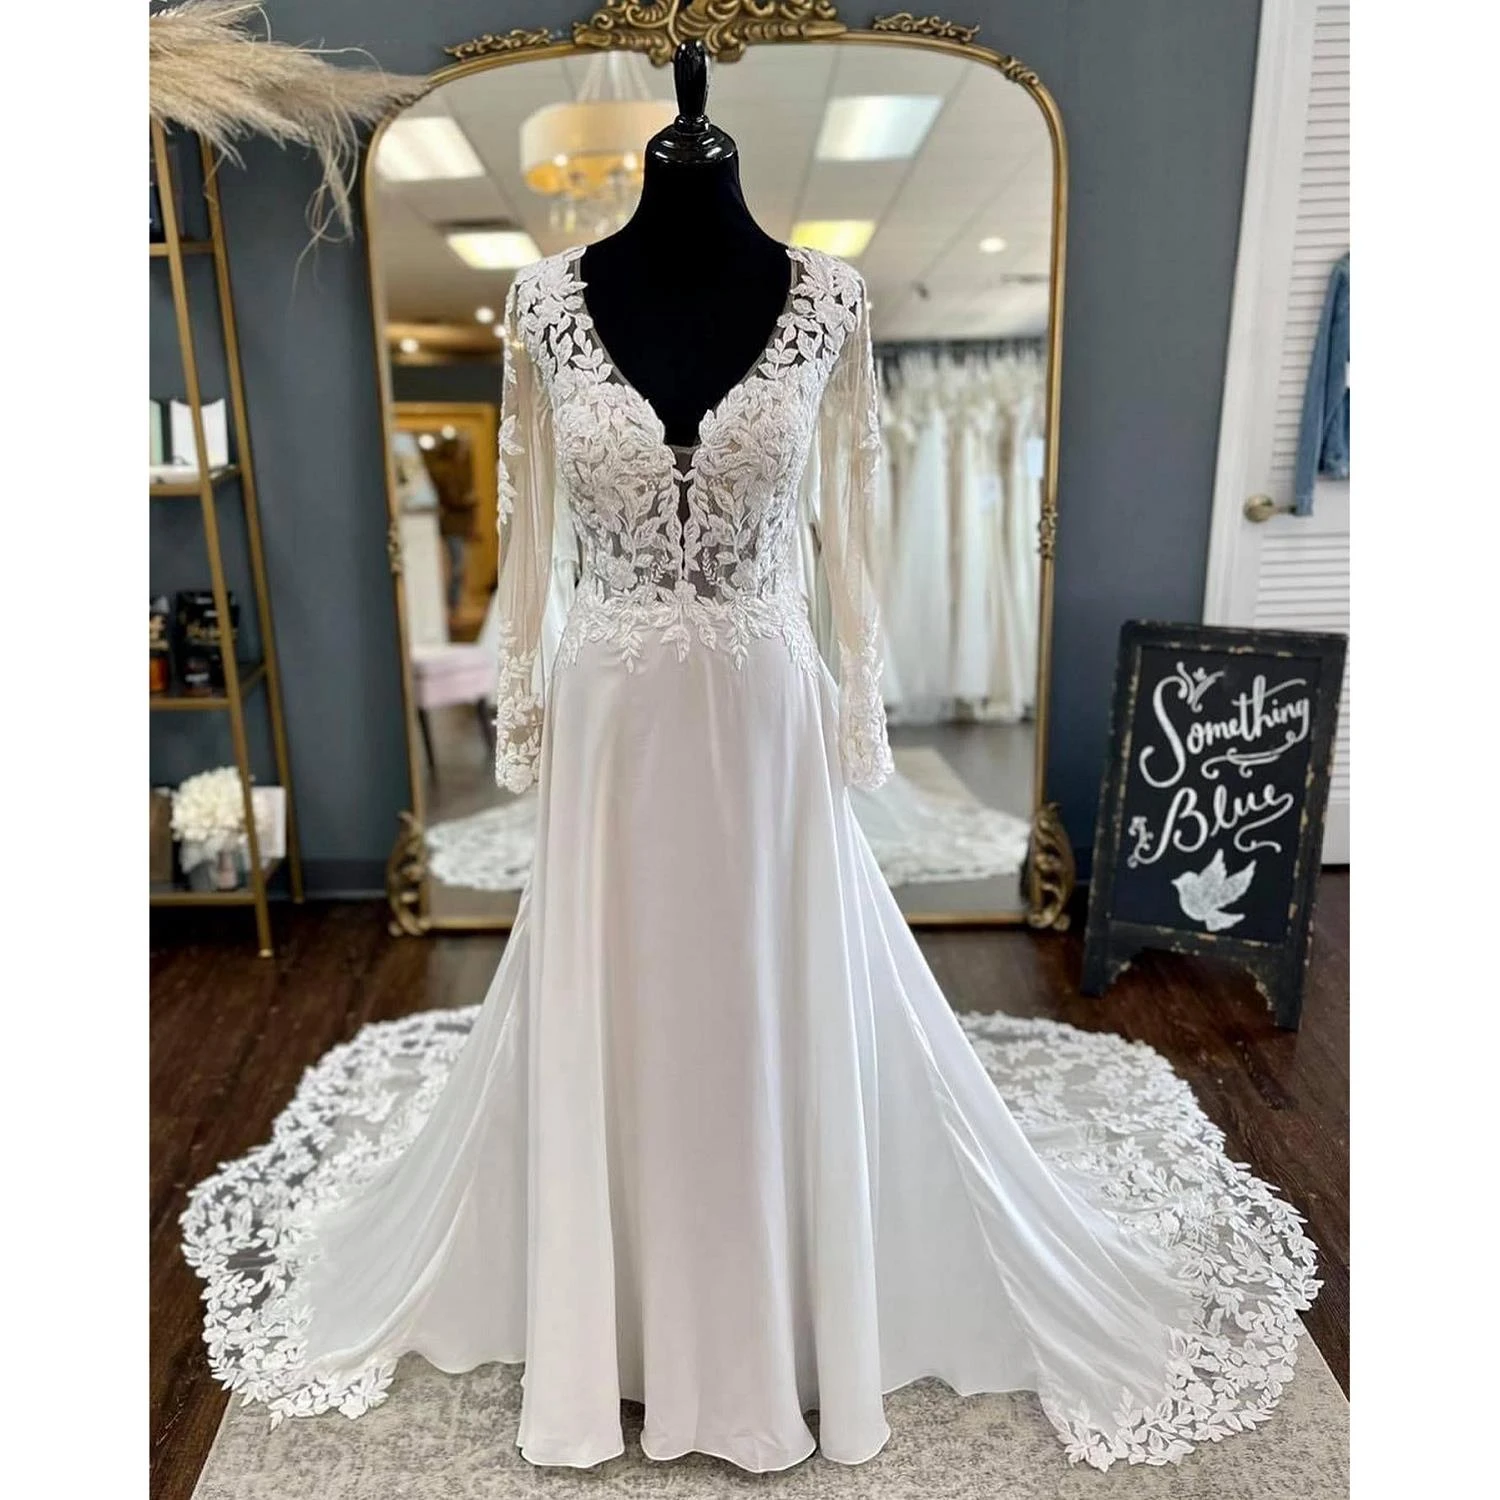 

Ivory Lace Appliques Beading Chiffon Crepe Long Sleeves A-Line Wedding Dresses Chapel Train Custom Made Bridal Gowns